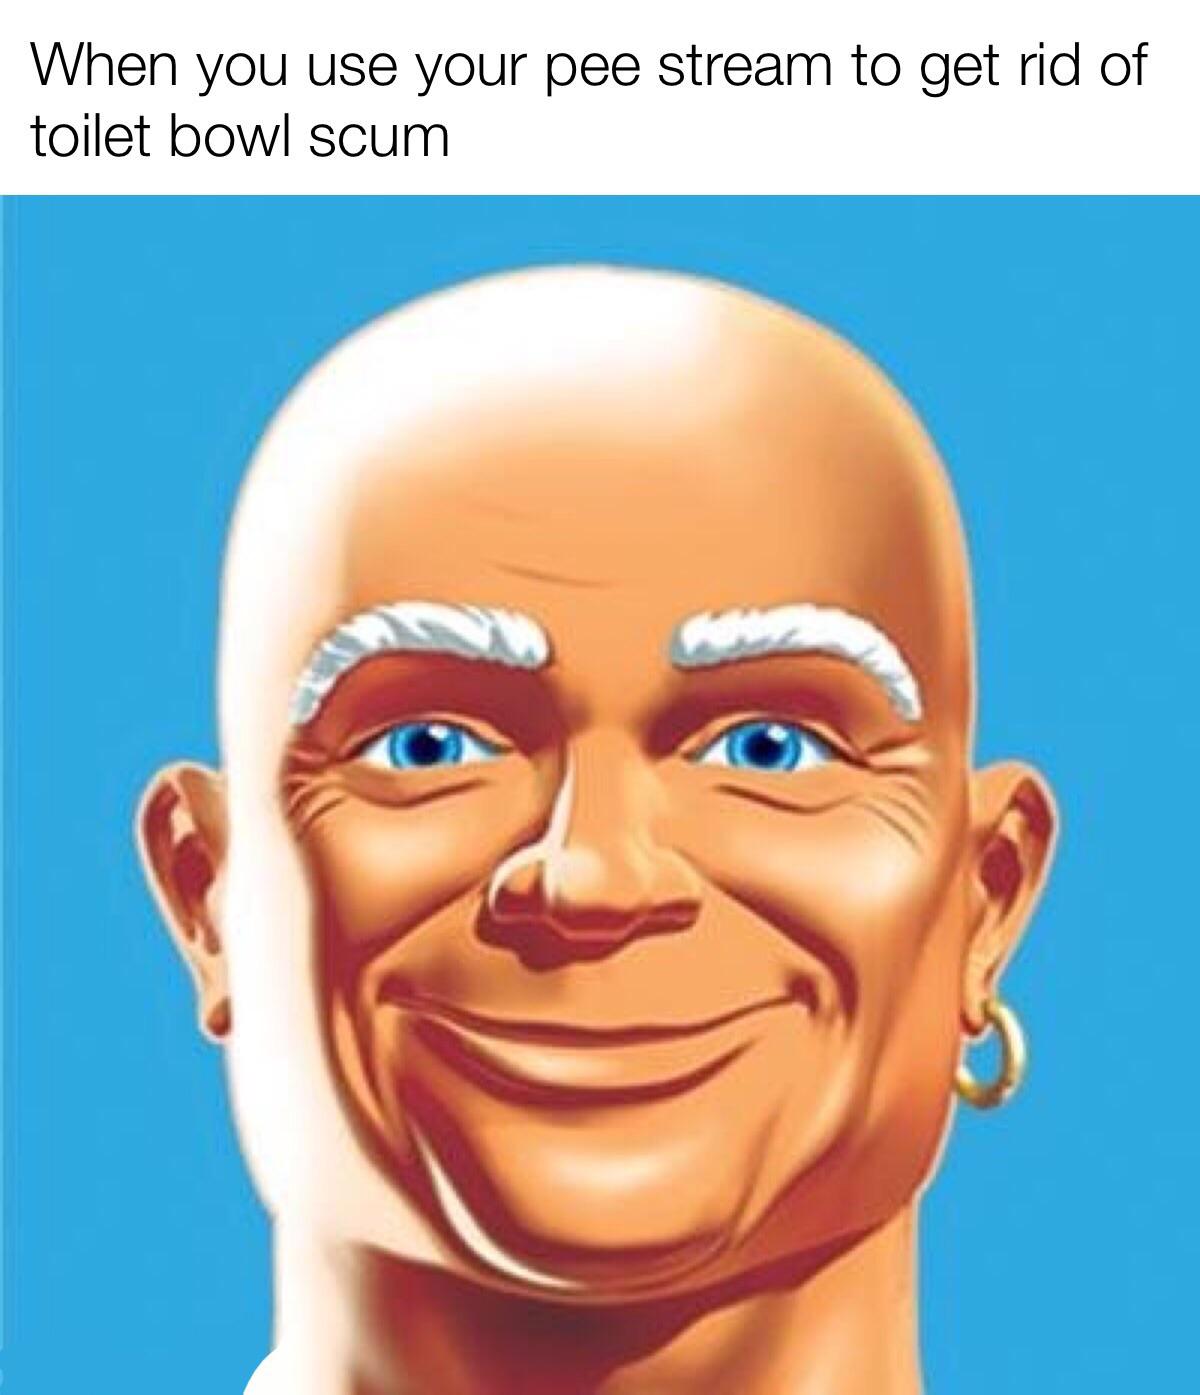 mr clean - When you use your pee stream to get rid of toilet bowl scum